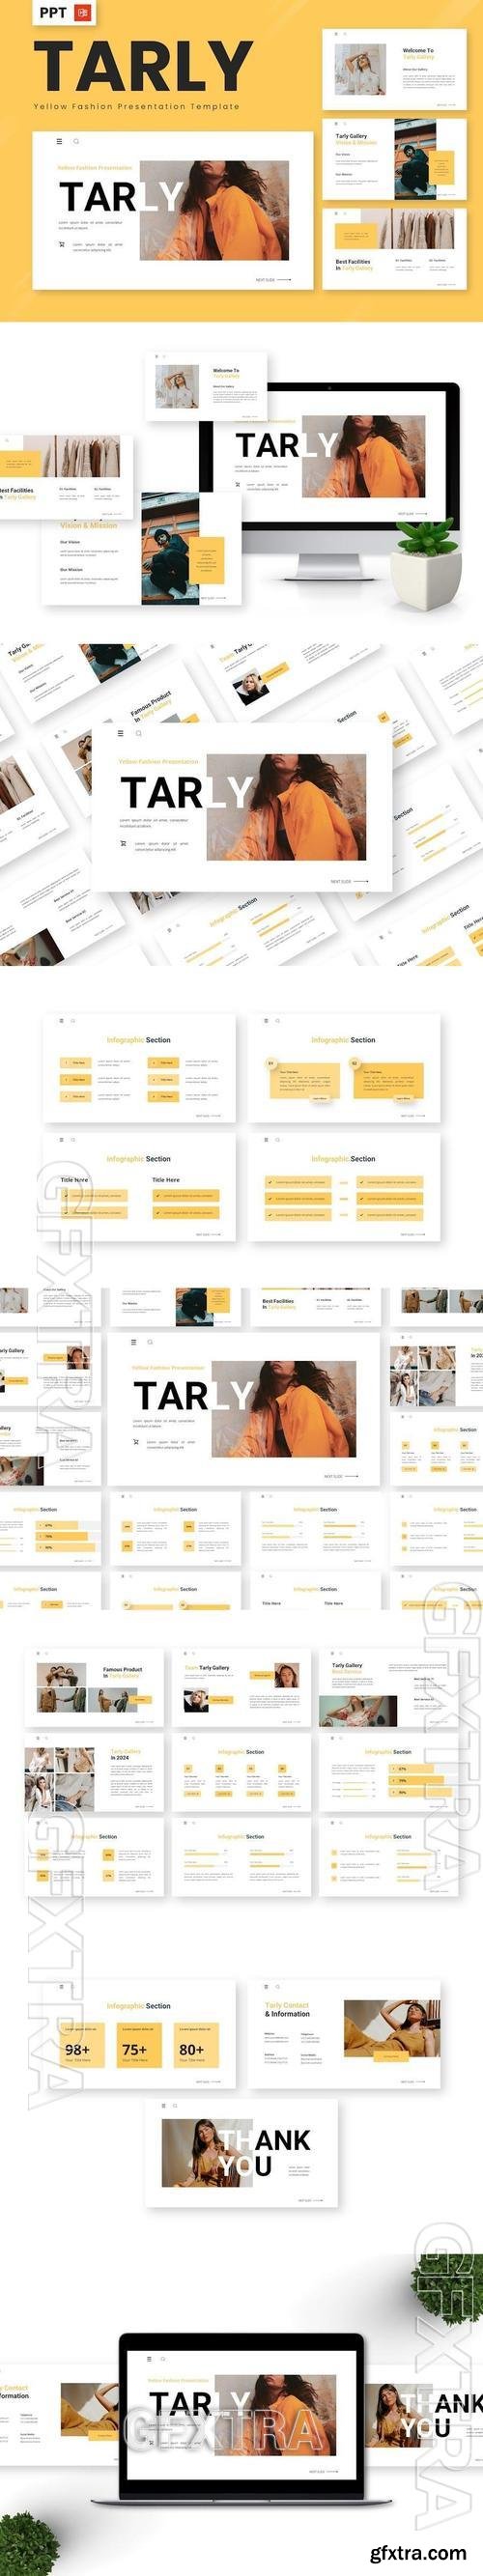 Tarly - Yellow Fashion Powerpoint Templates 824FQL8